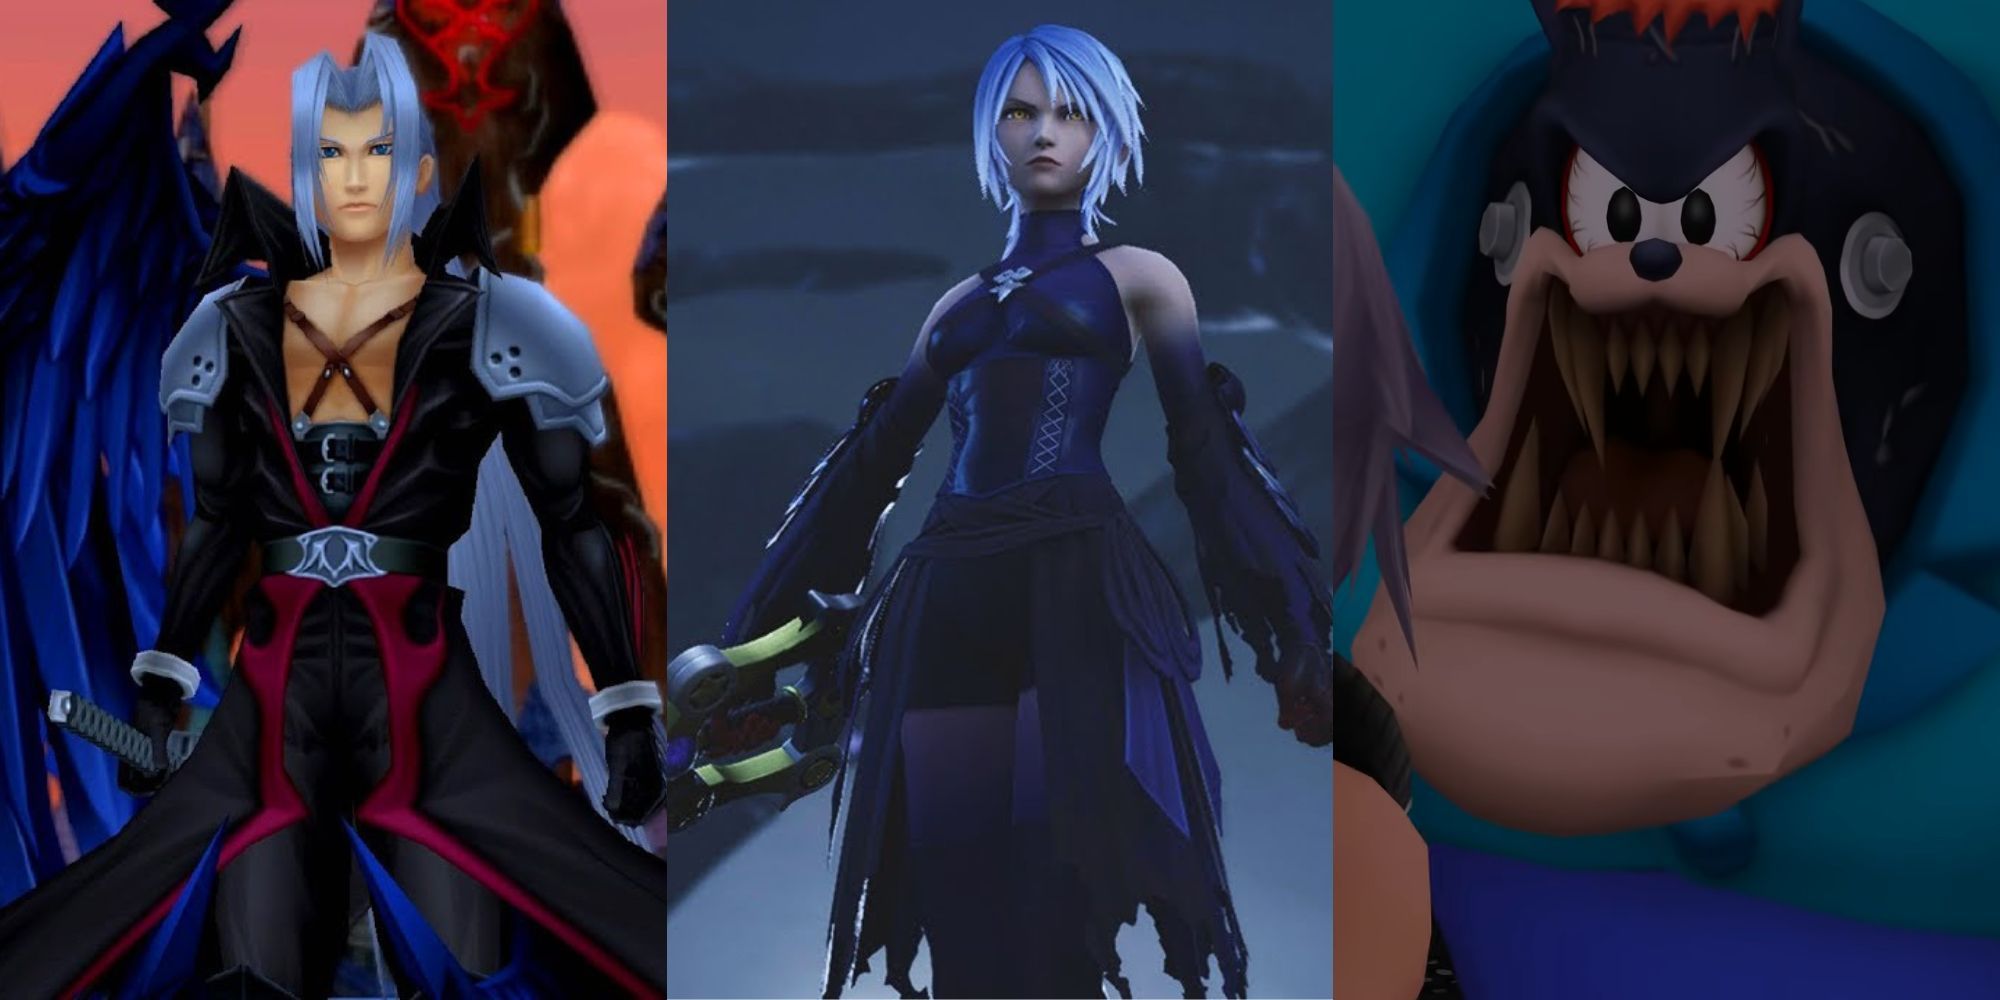 A collage of some Kingdom Hearts bosses that were disappointingly easy: Sephiroth from Kingdom Hearts 2, Anti-Aqua from Kingdom Hearts 3 and Julius from Kingdom Hearts Dream Drop Distance.